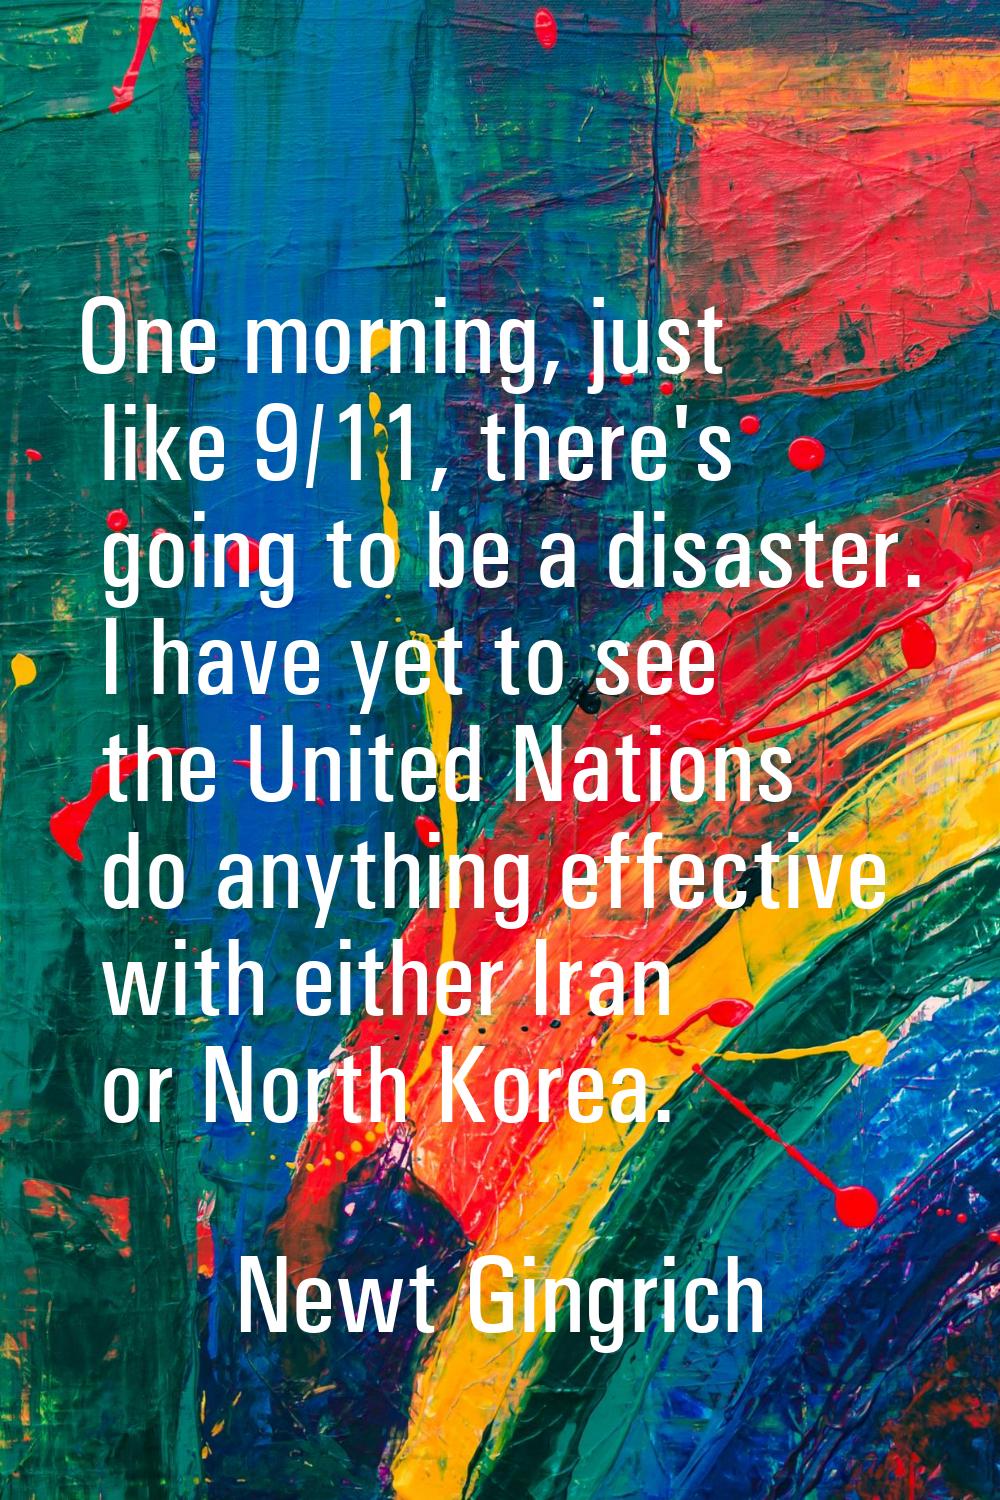 One morning, just like 9/11, there's going to be a disaster. I have yet to see the United Nations d